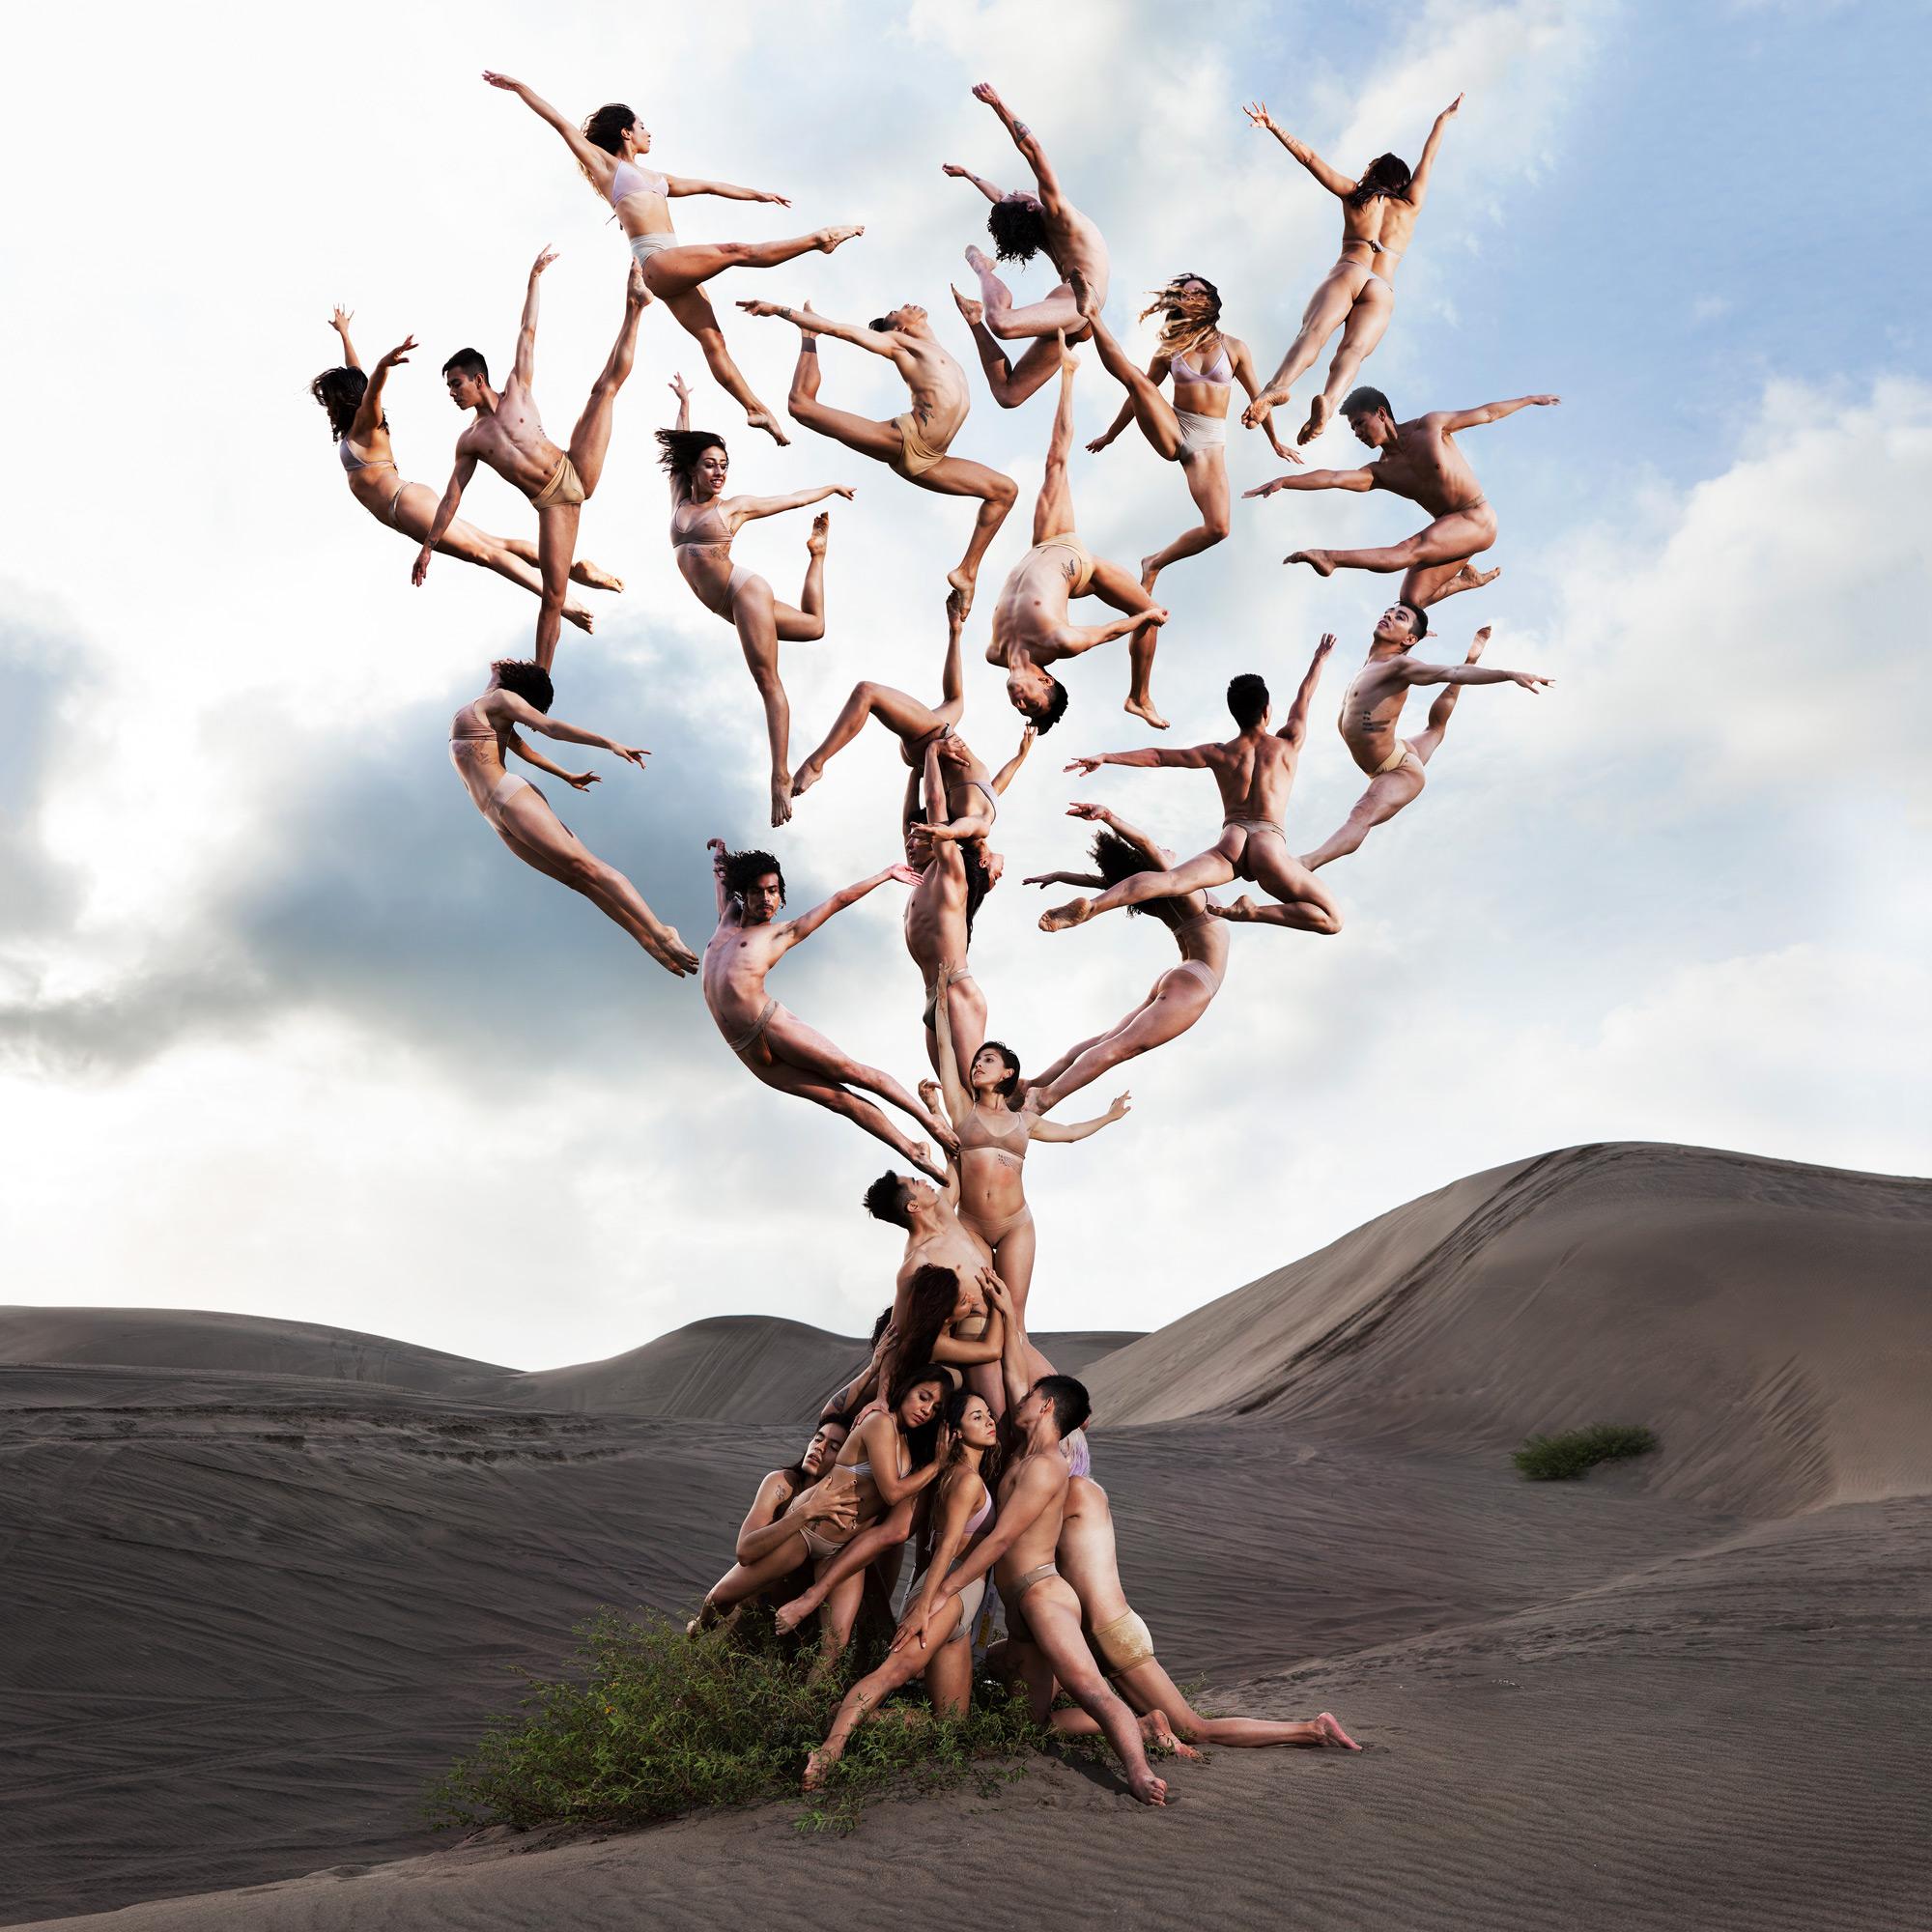 "The Tree Of Life" Photography 40" x 40" inch Ed. 9/12 by Rob Woodcox